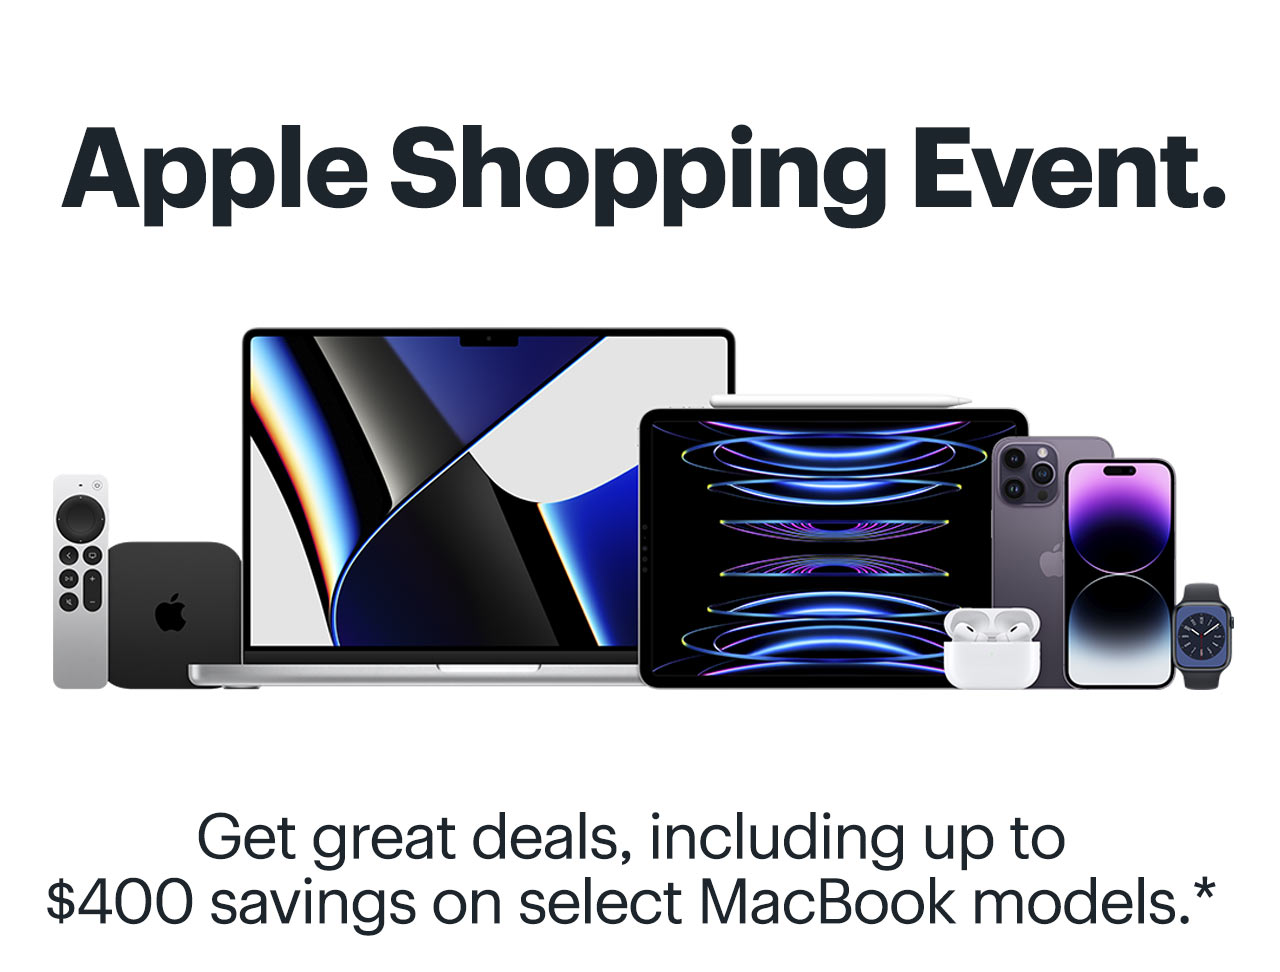 Apple Shopping Event. Get great deals, including up to $400 savings on select MacBook models. Reference disclaimer. Apple Shopping Event. Get great deals, including up to $400 savings on select MacBook models.* 